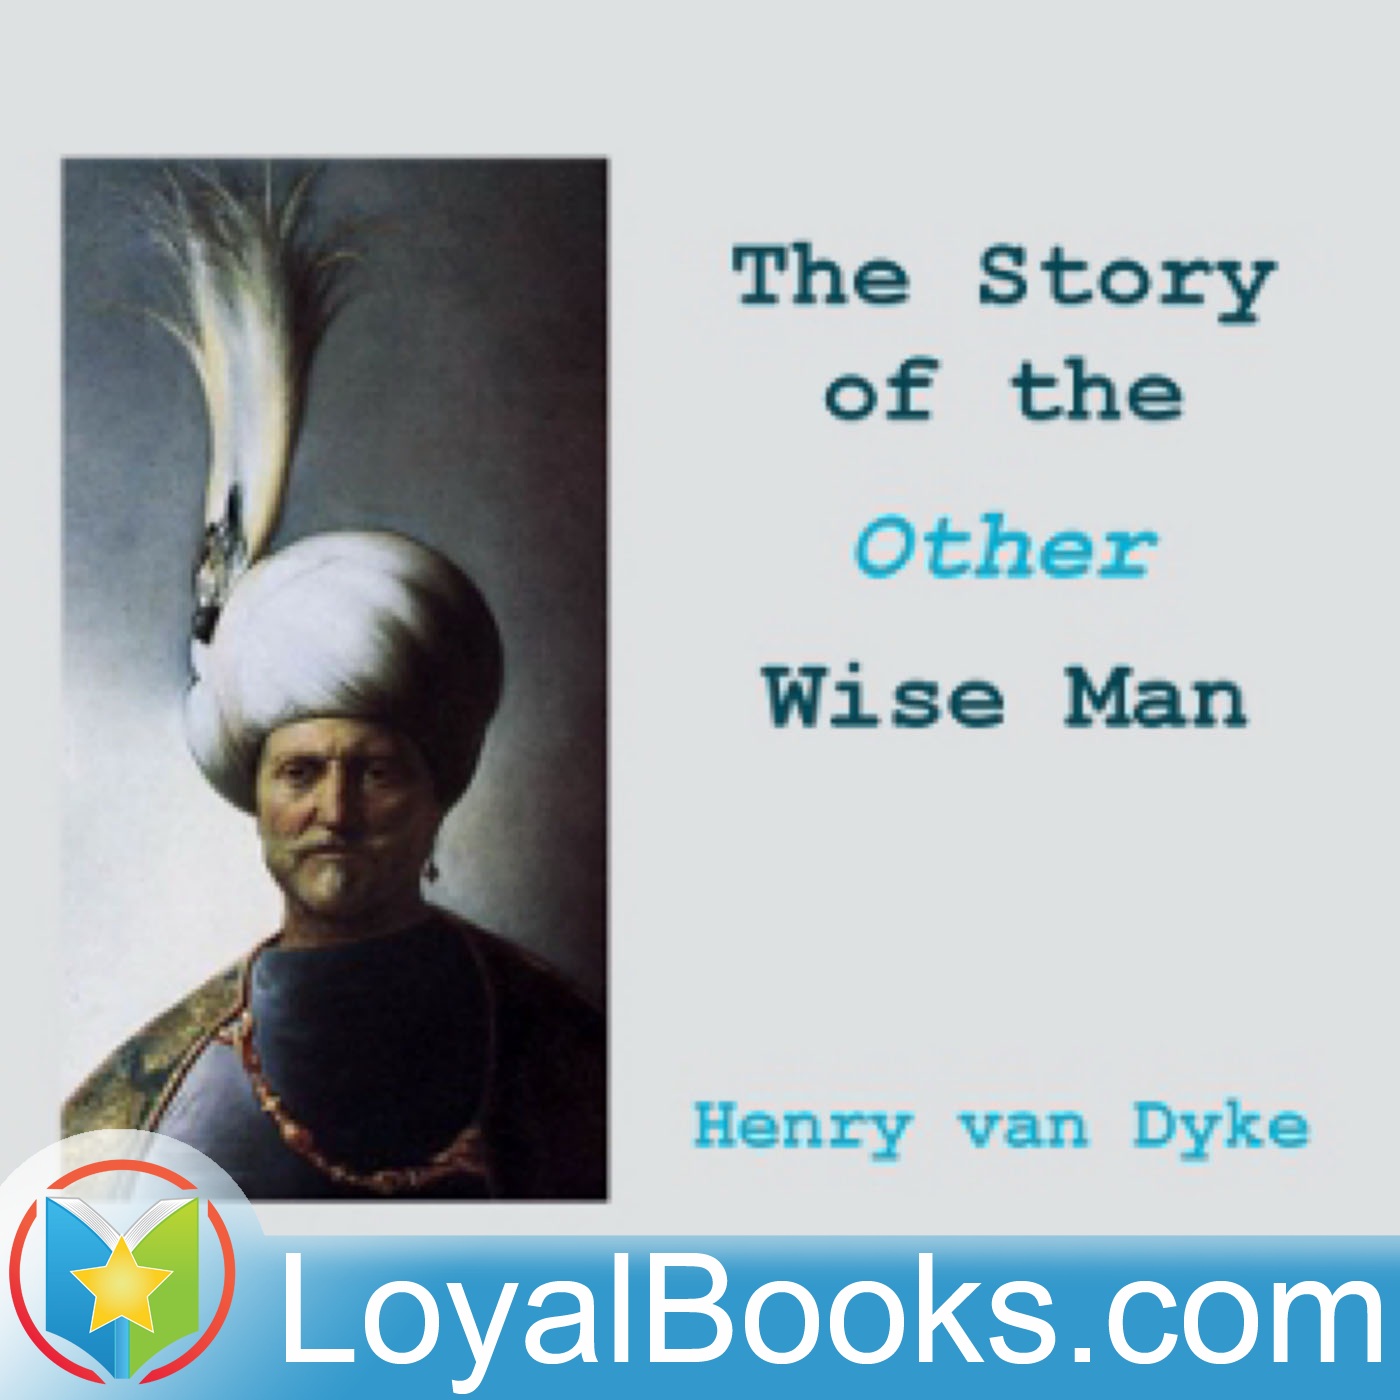 The Story of the Other Wise Man by Henry van Dyke